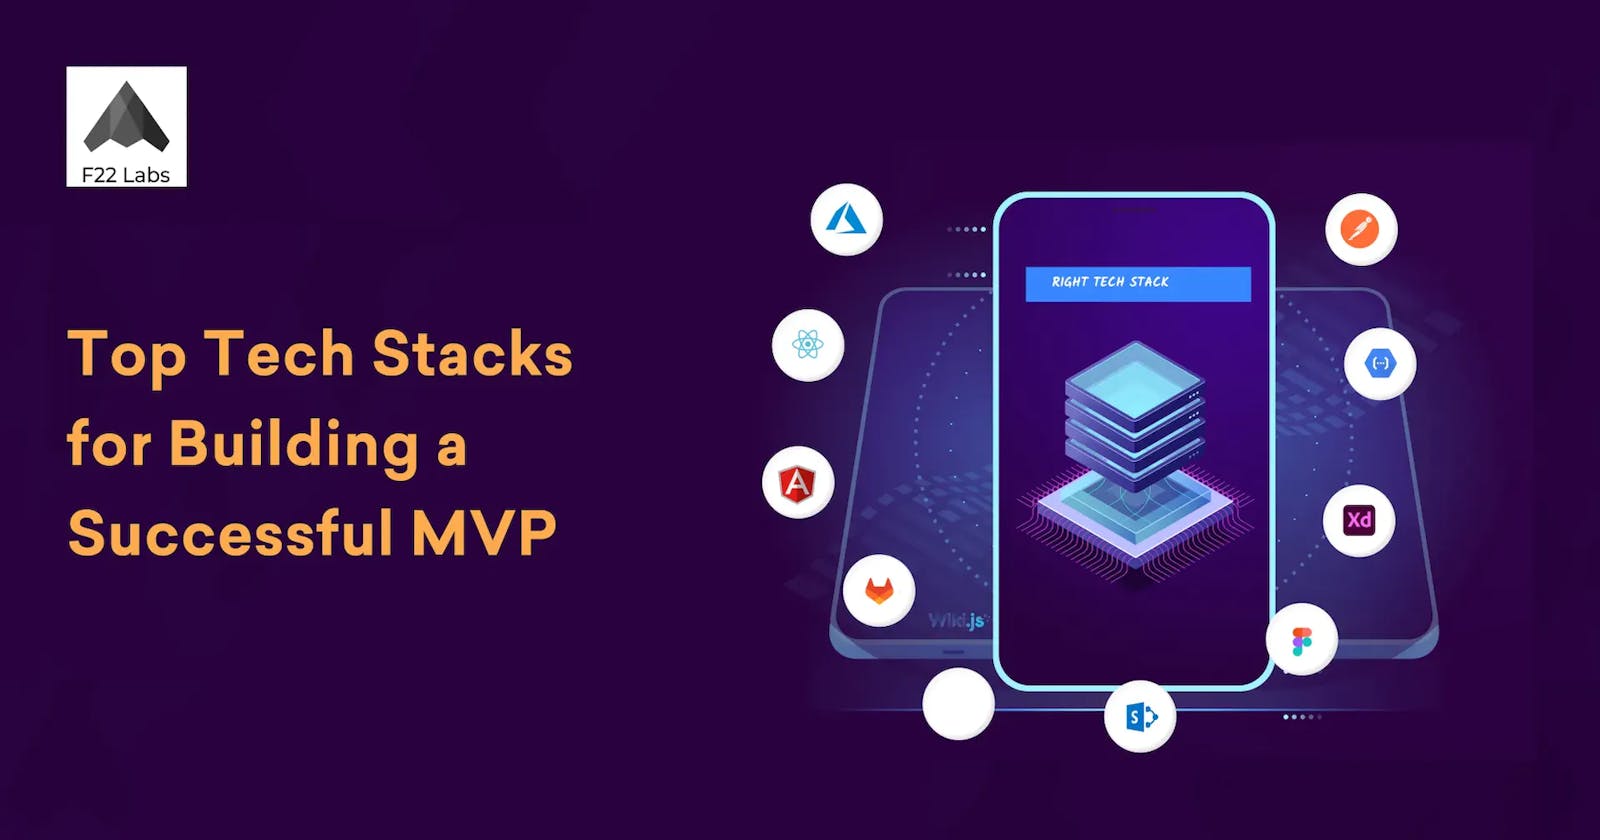 Top Tech Stacks for Building a Successful MVP